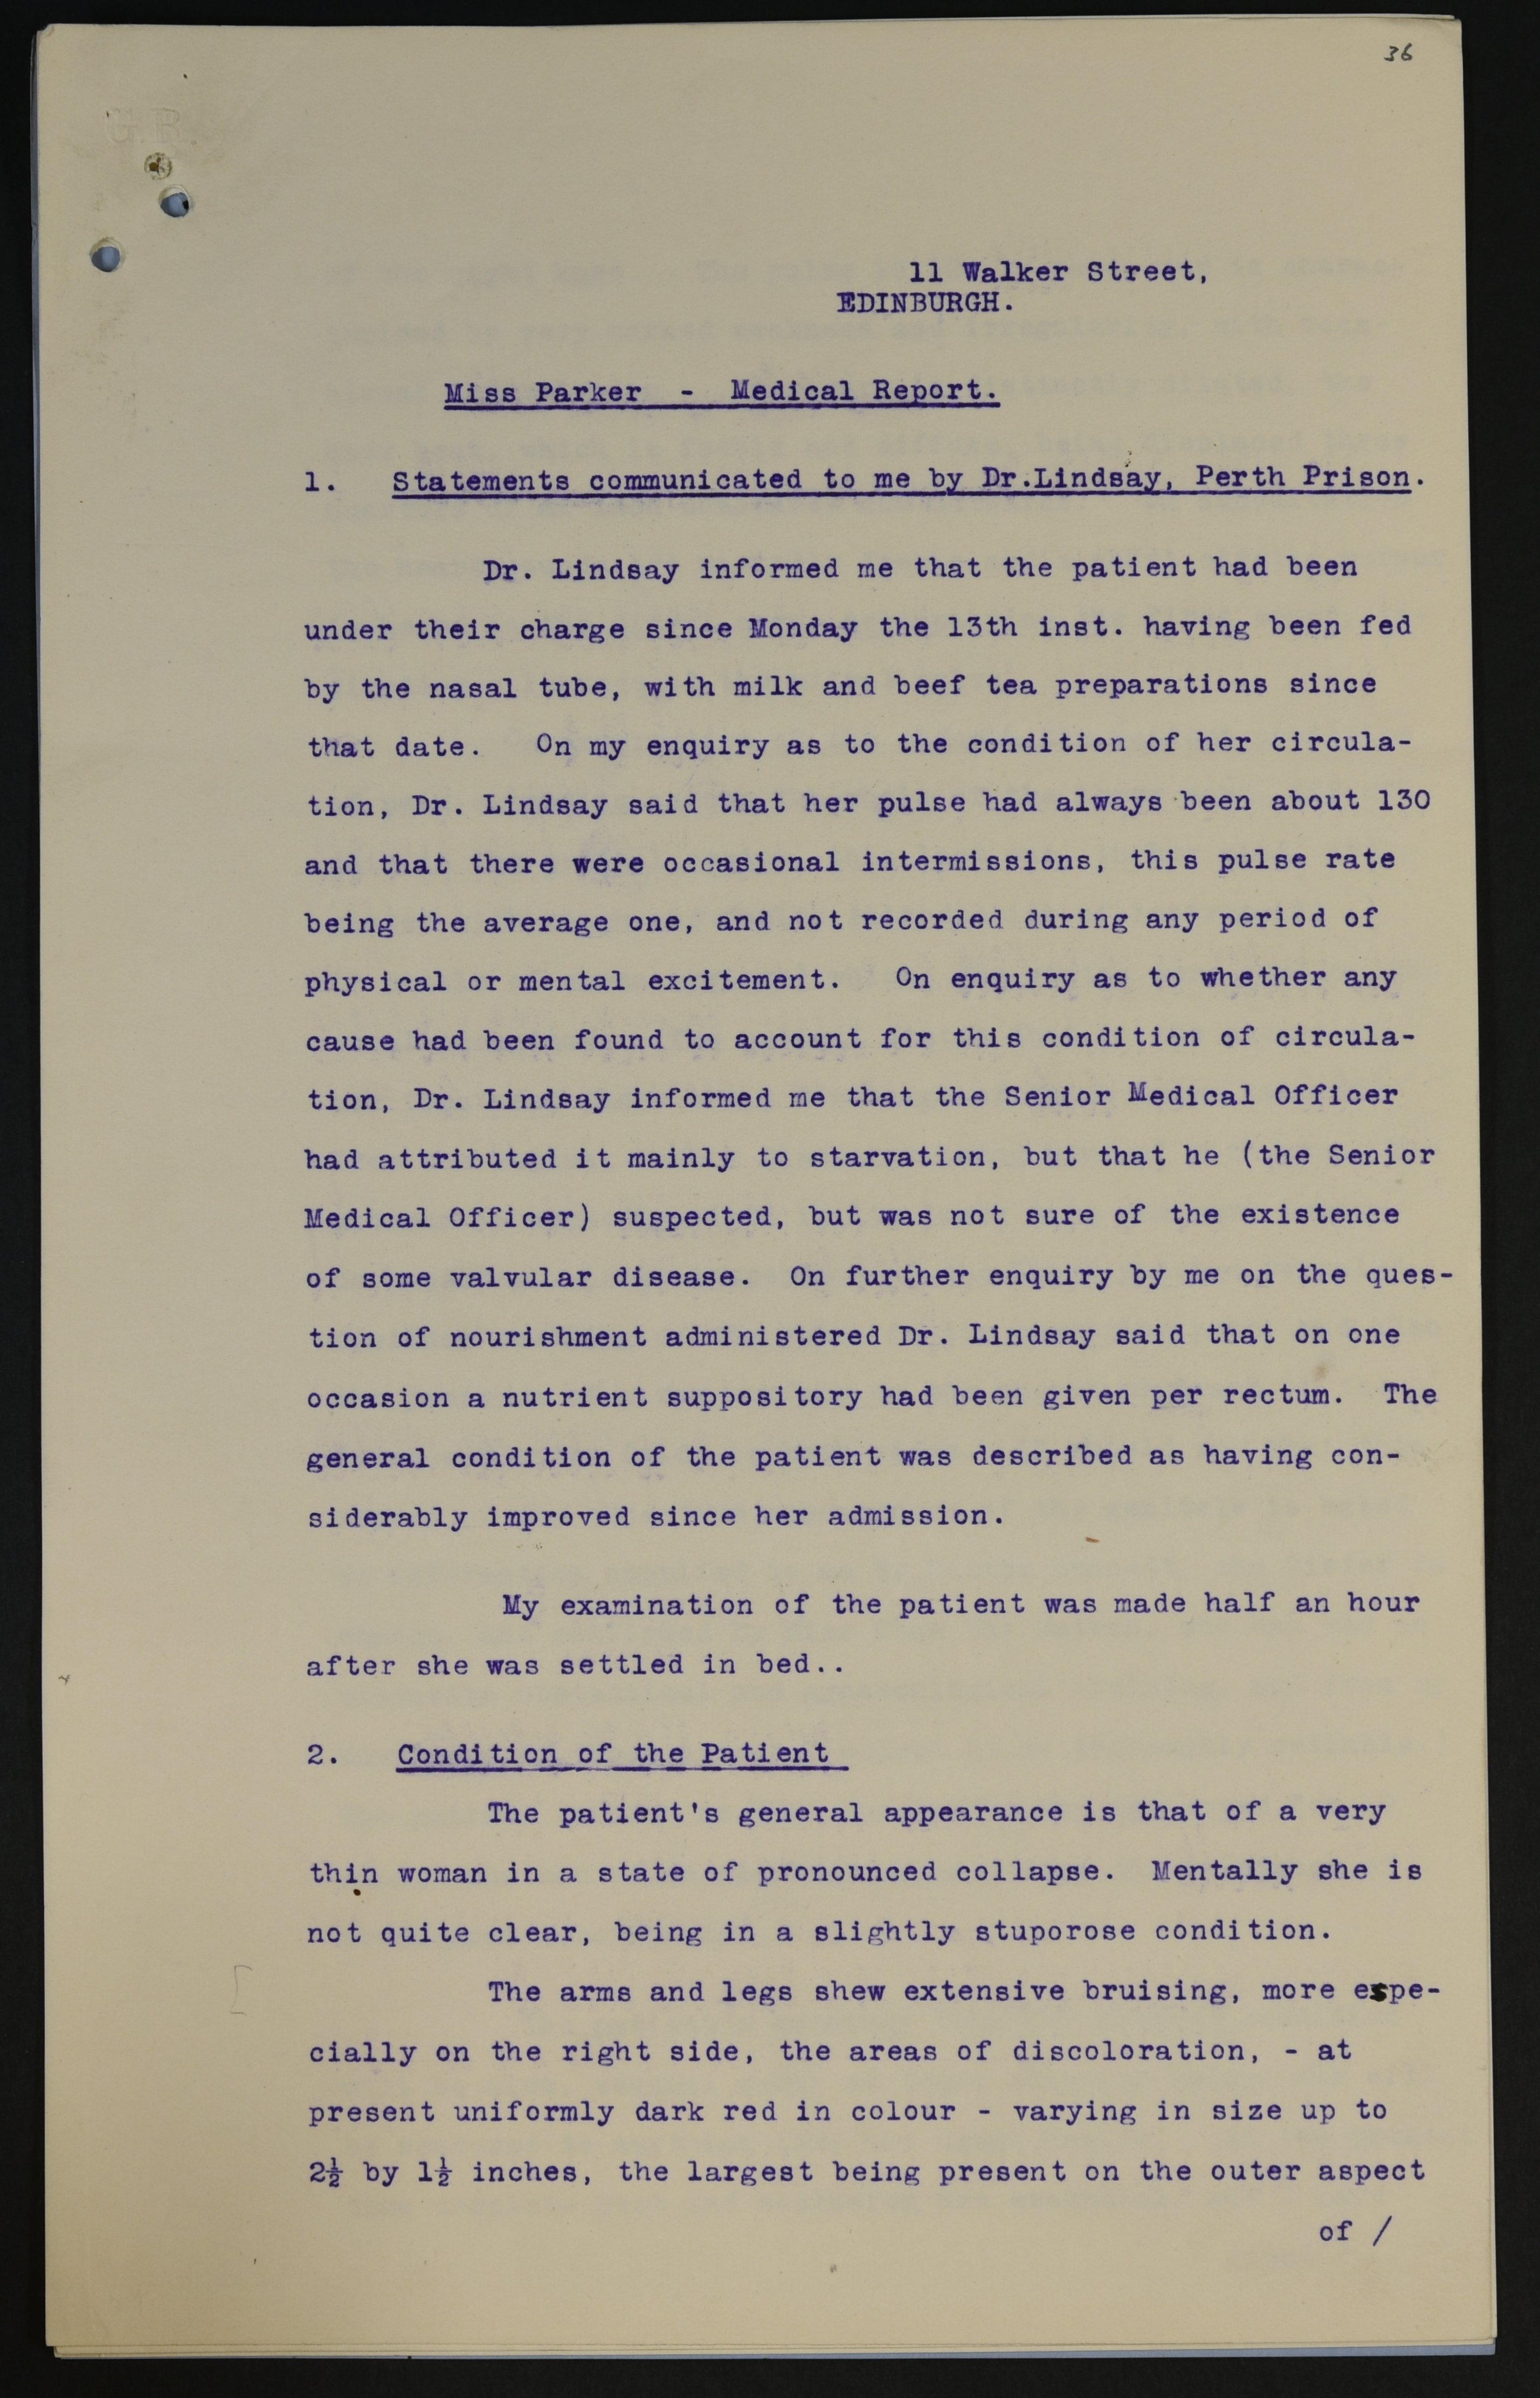 Page 1 of a medical report on Fanny Parker's condition